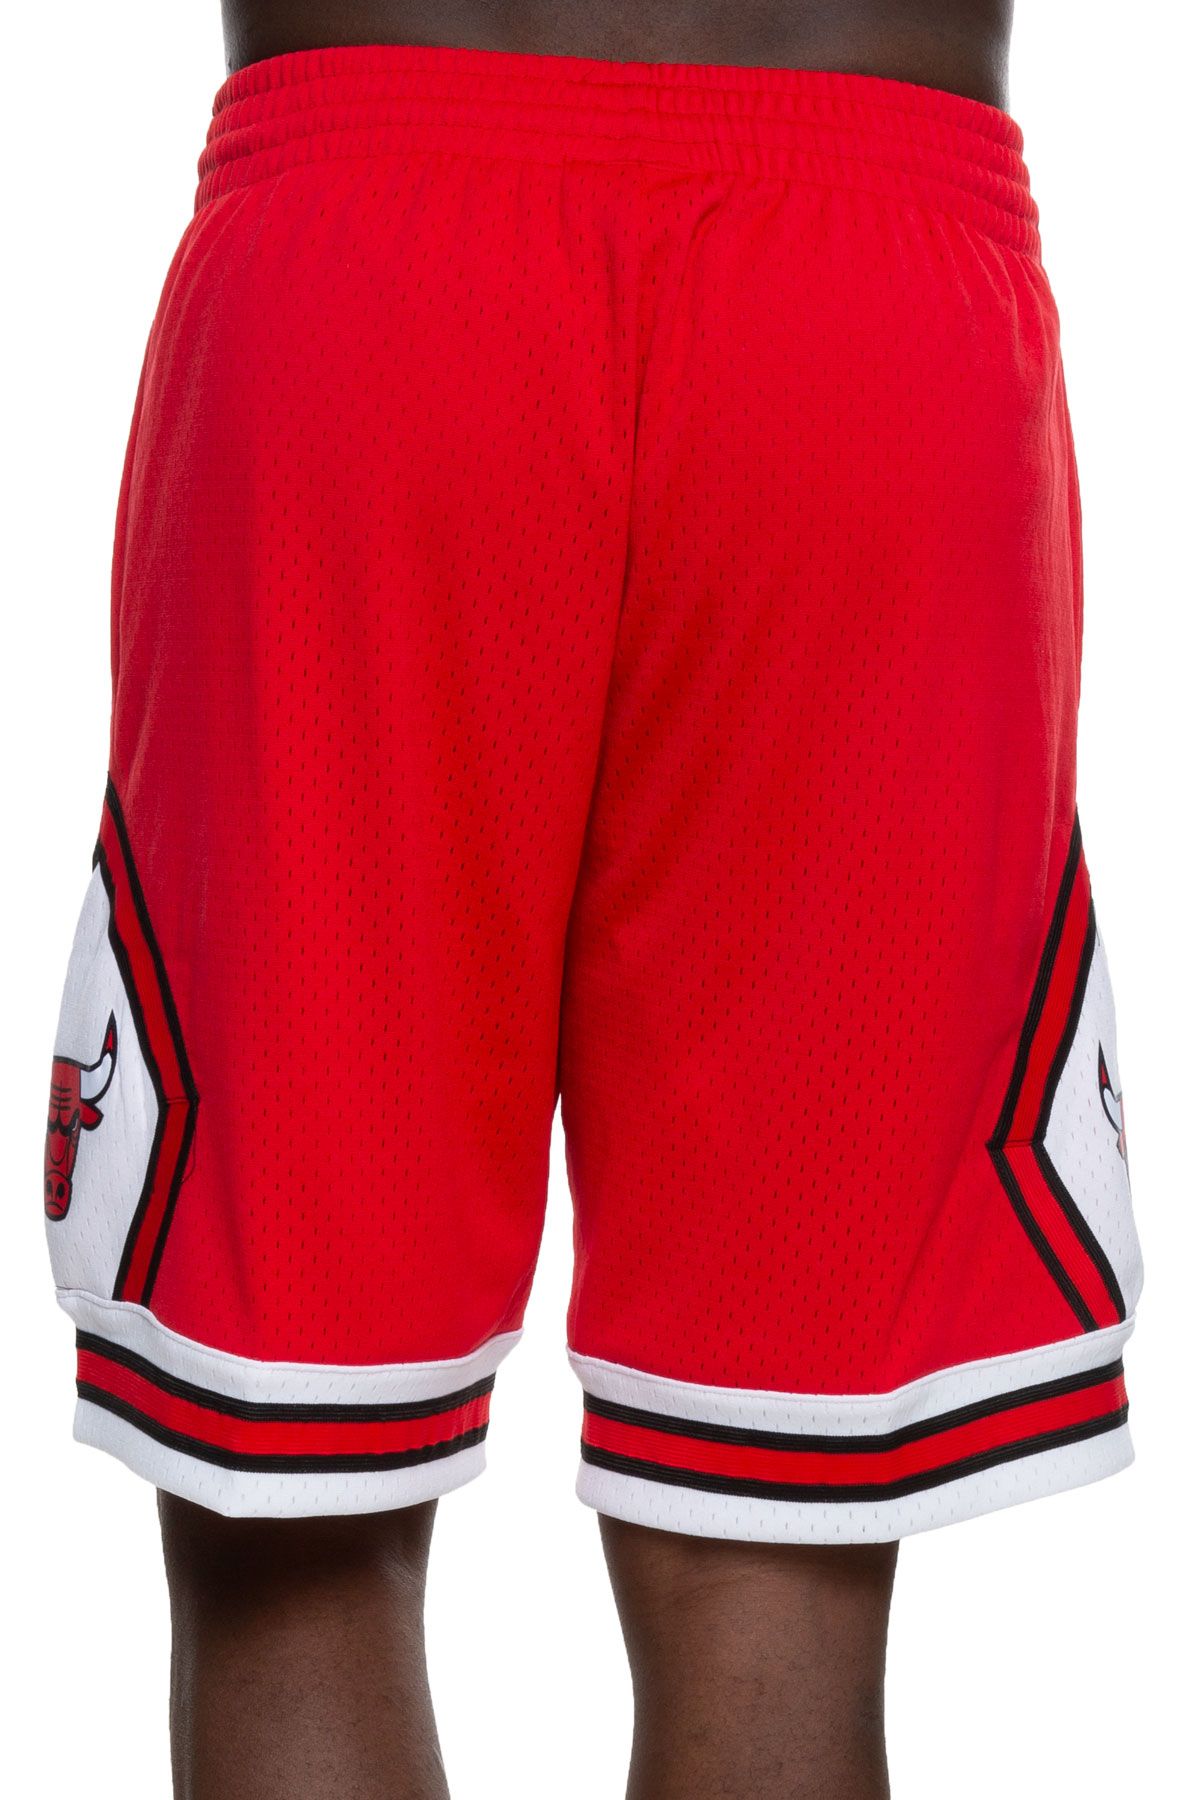 Mitchell and Ness Swingman Chicago Bulls Shorts With pockets